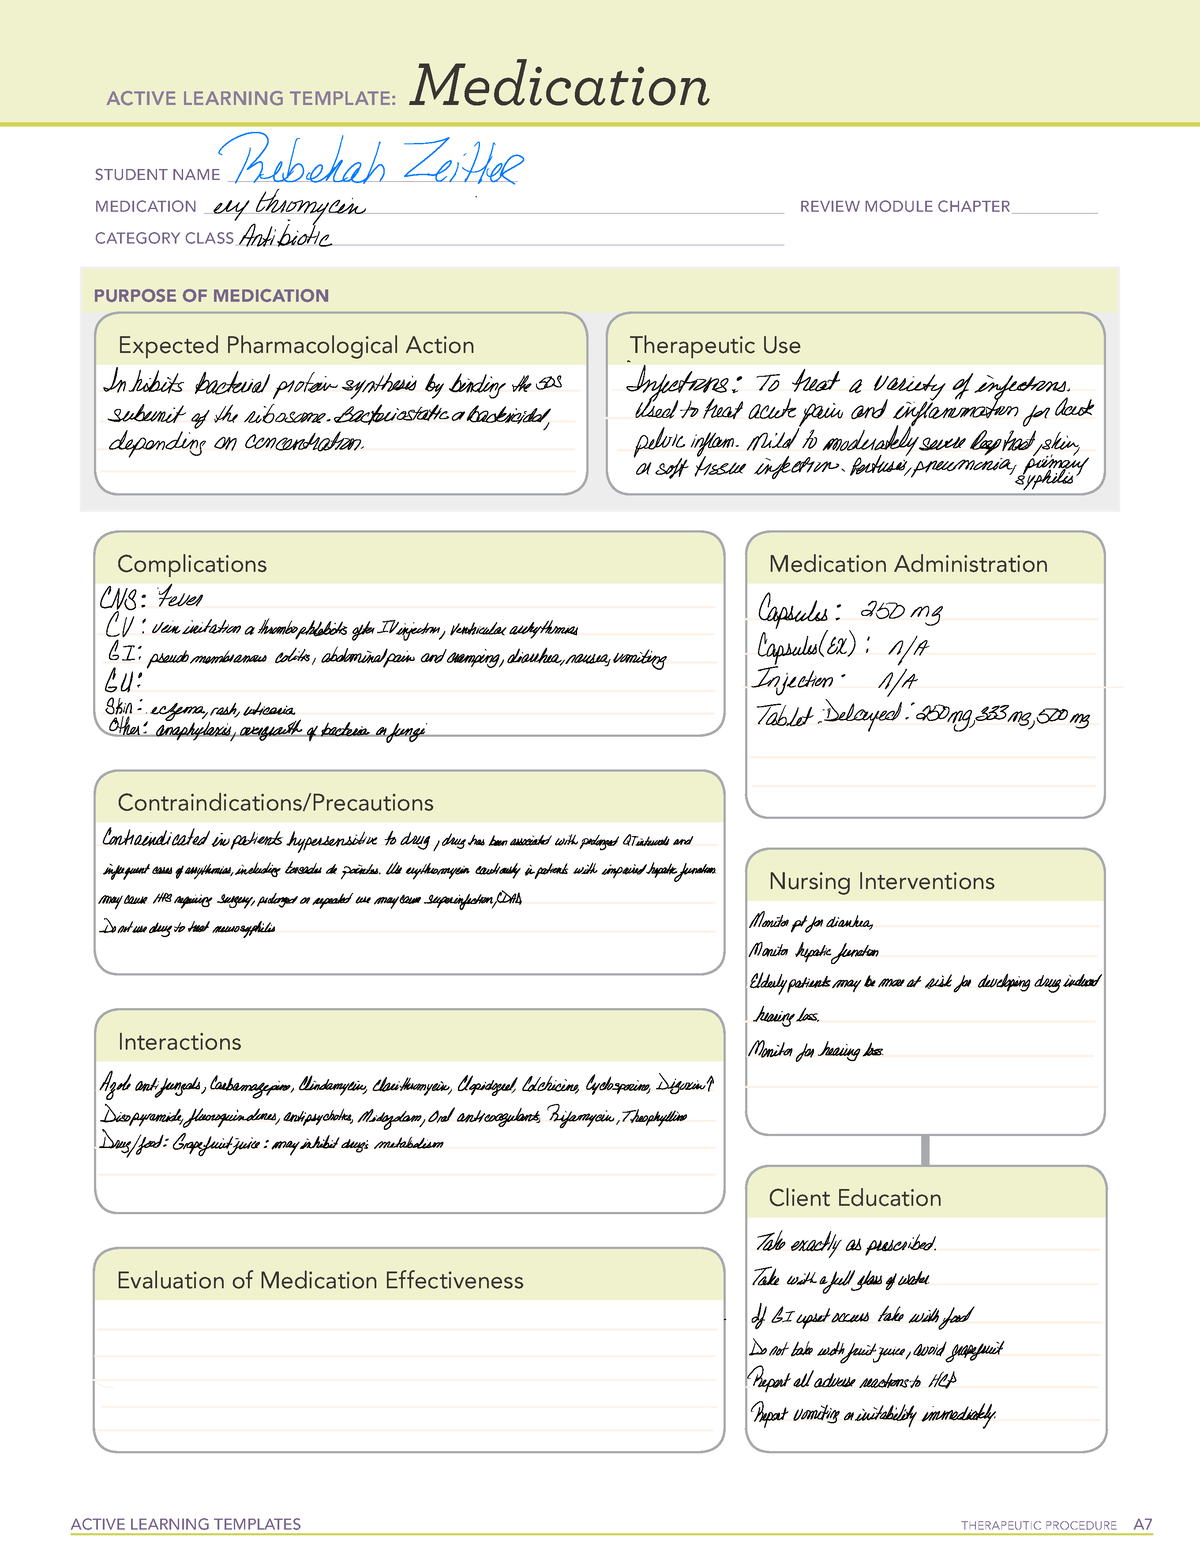 erythromycin-med-active-learning-templates-therapeutic-procedure-a